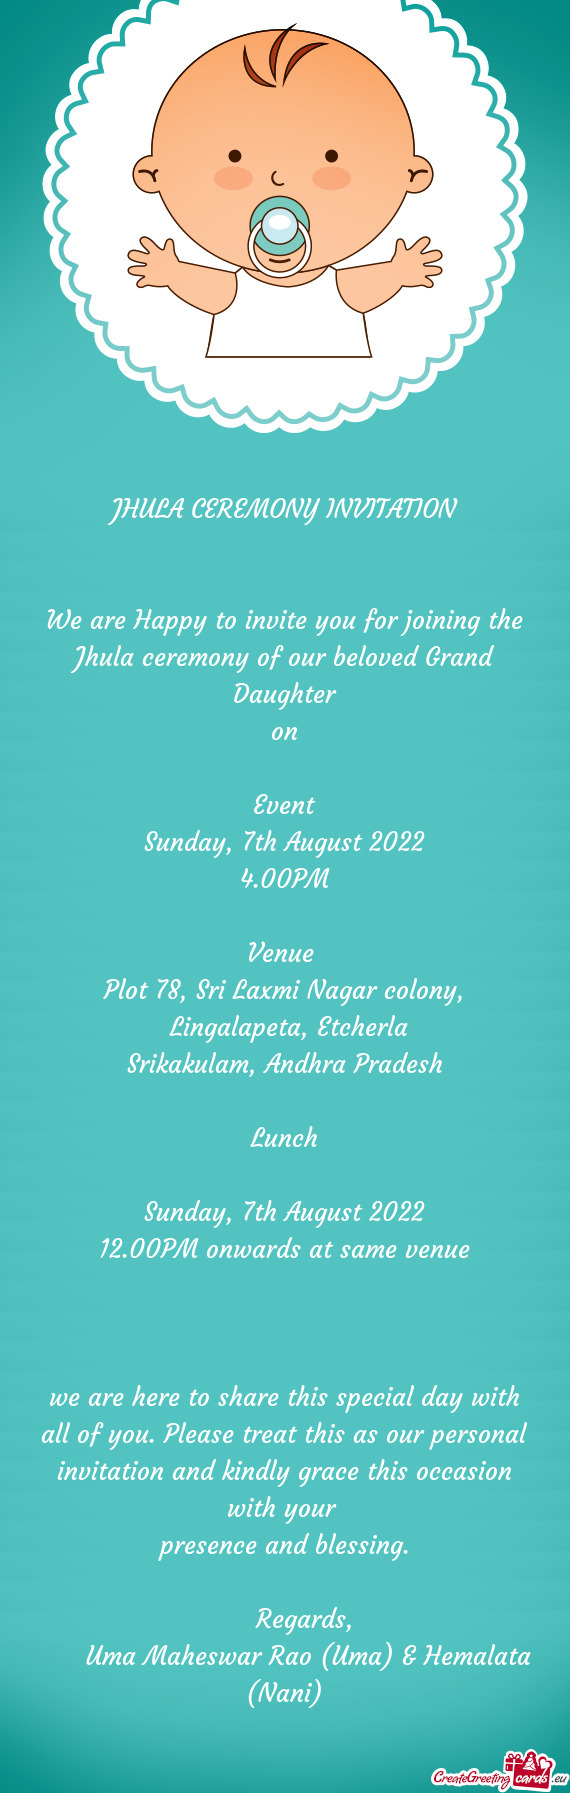 We are Happy to invite you for joining the Jhula ceremony of our beloved Grand Daughter